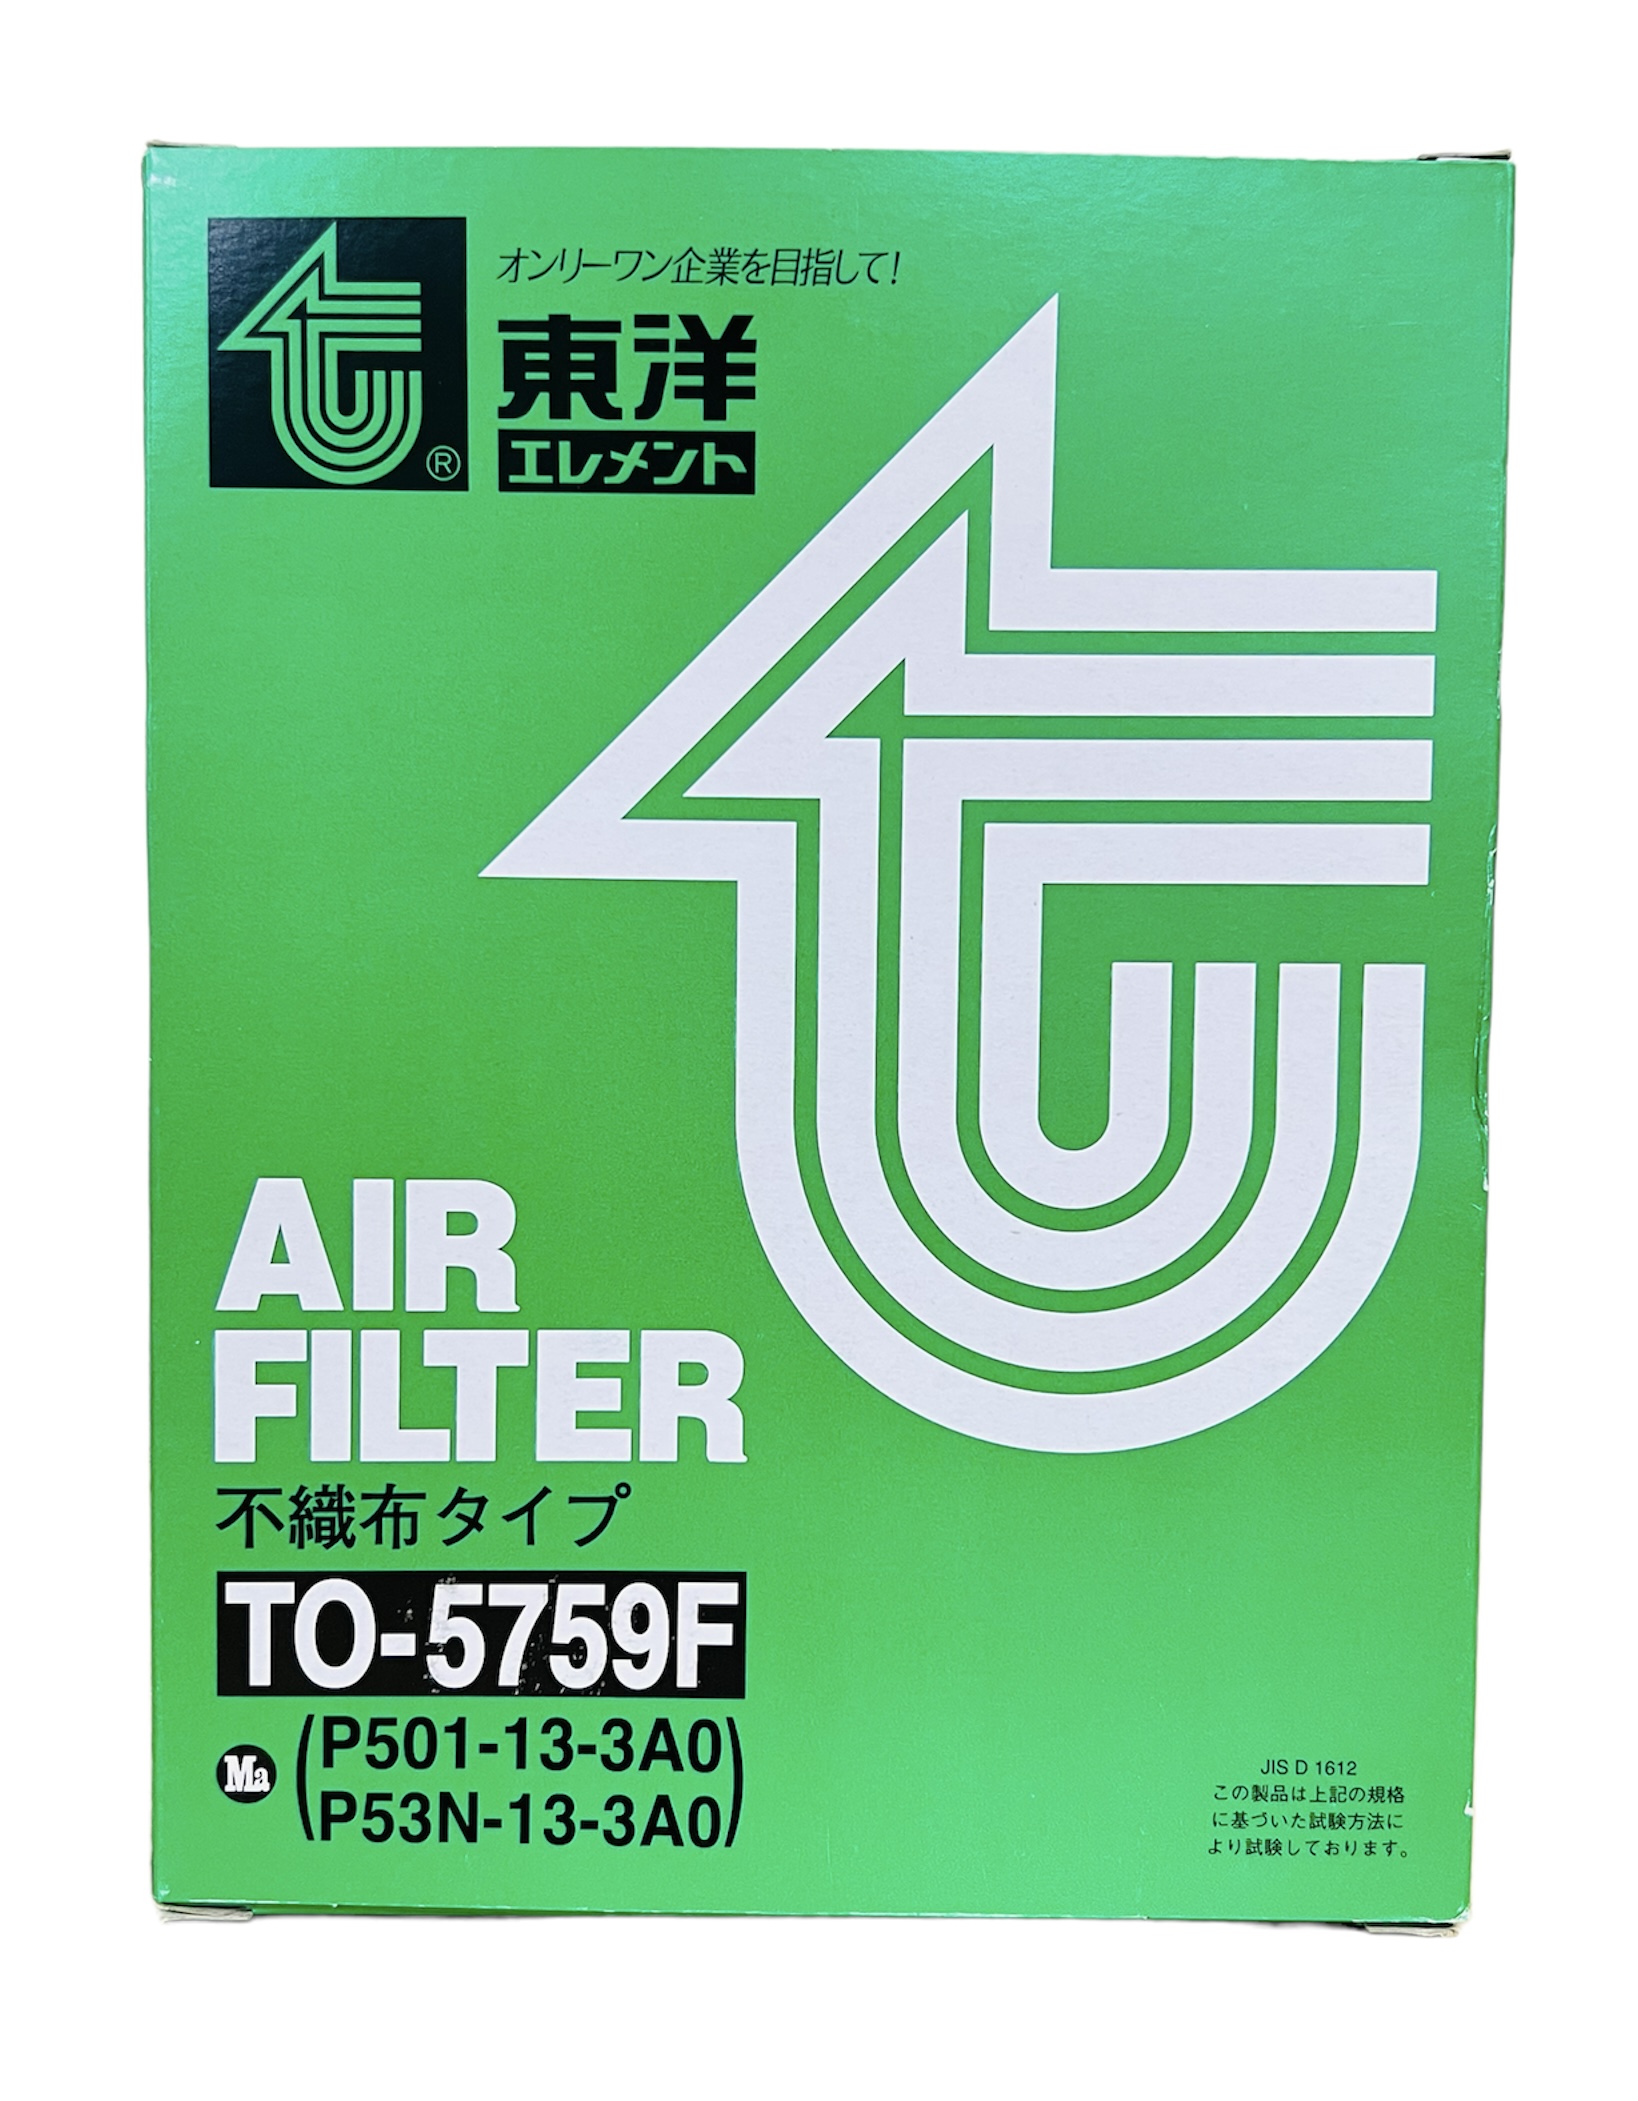 Air Filter TO-5759F